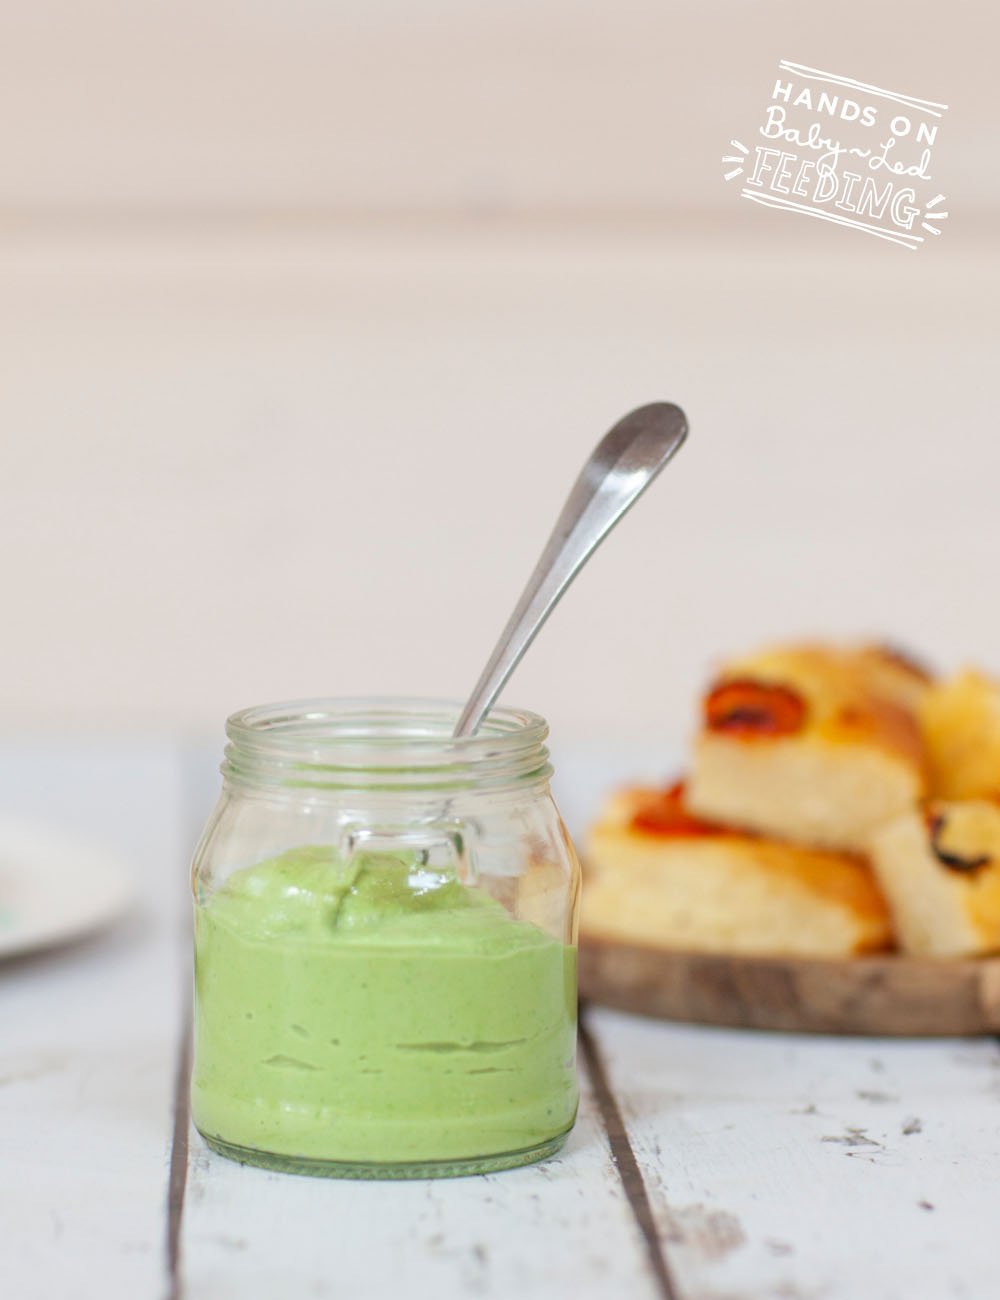 5 Minute Sweet Pea Hummus for Baby Led Weaning. A healthy hummus recipe, full of veggies! Hummus makes a super healthy dip for toddlers and babies! This fun savory snack for baby is vegan and dairy-free. #babyledweaning #babyledfeeding #hummus #vegan #dairyfree #eggfree #dipdip #healthysnacks #healthydips #healthyrecipe #cookingwithkids